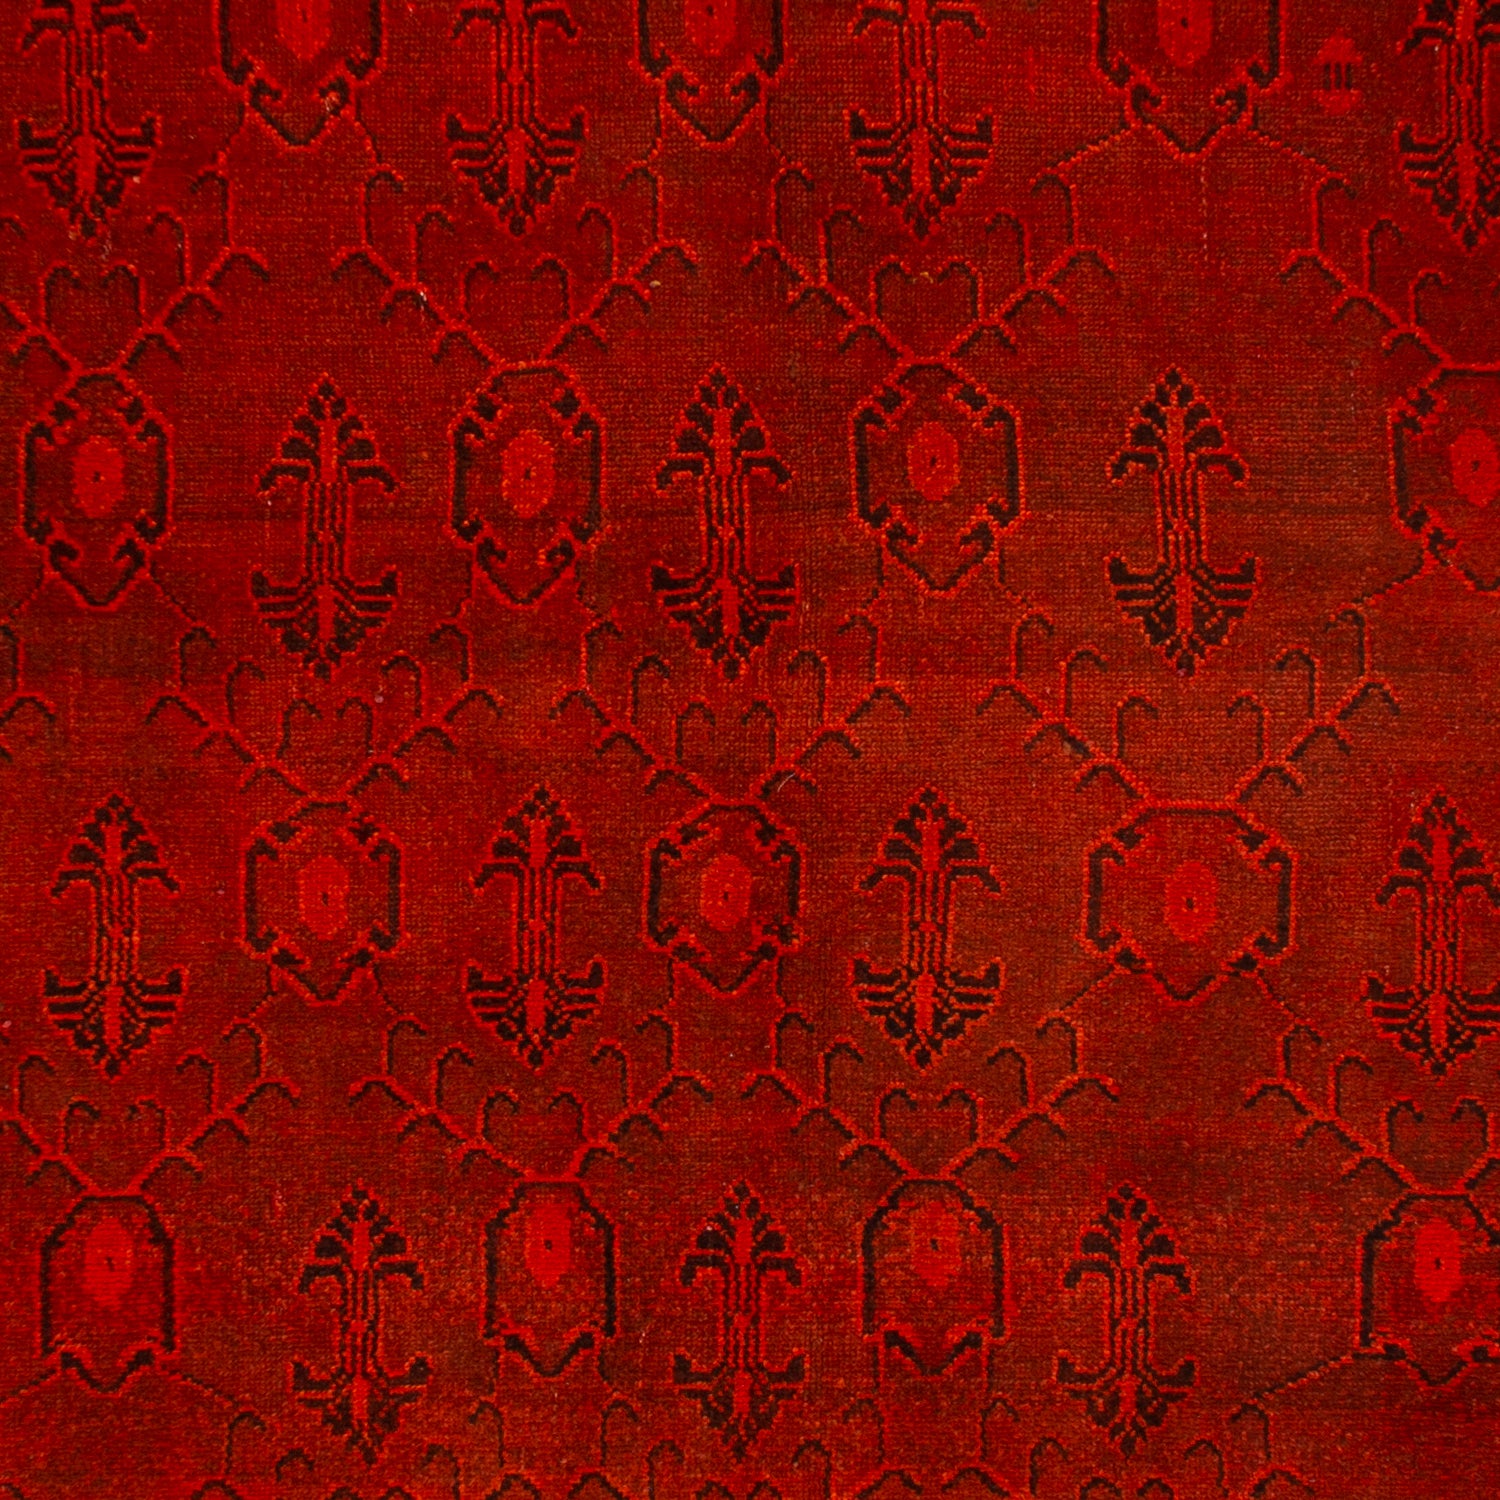 Close-up of rich red fabric with intricate symmetrical pattern.